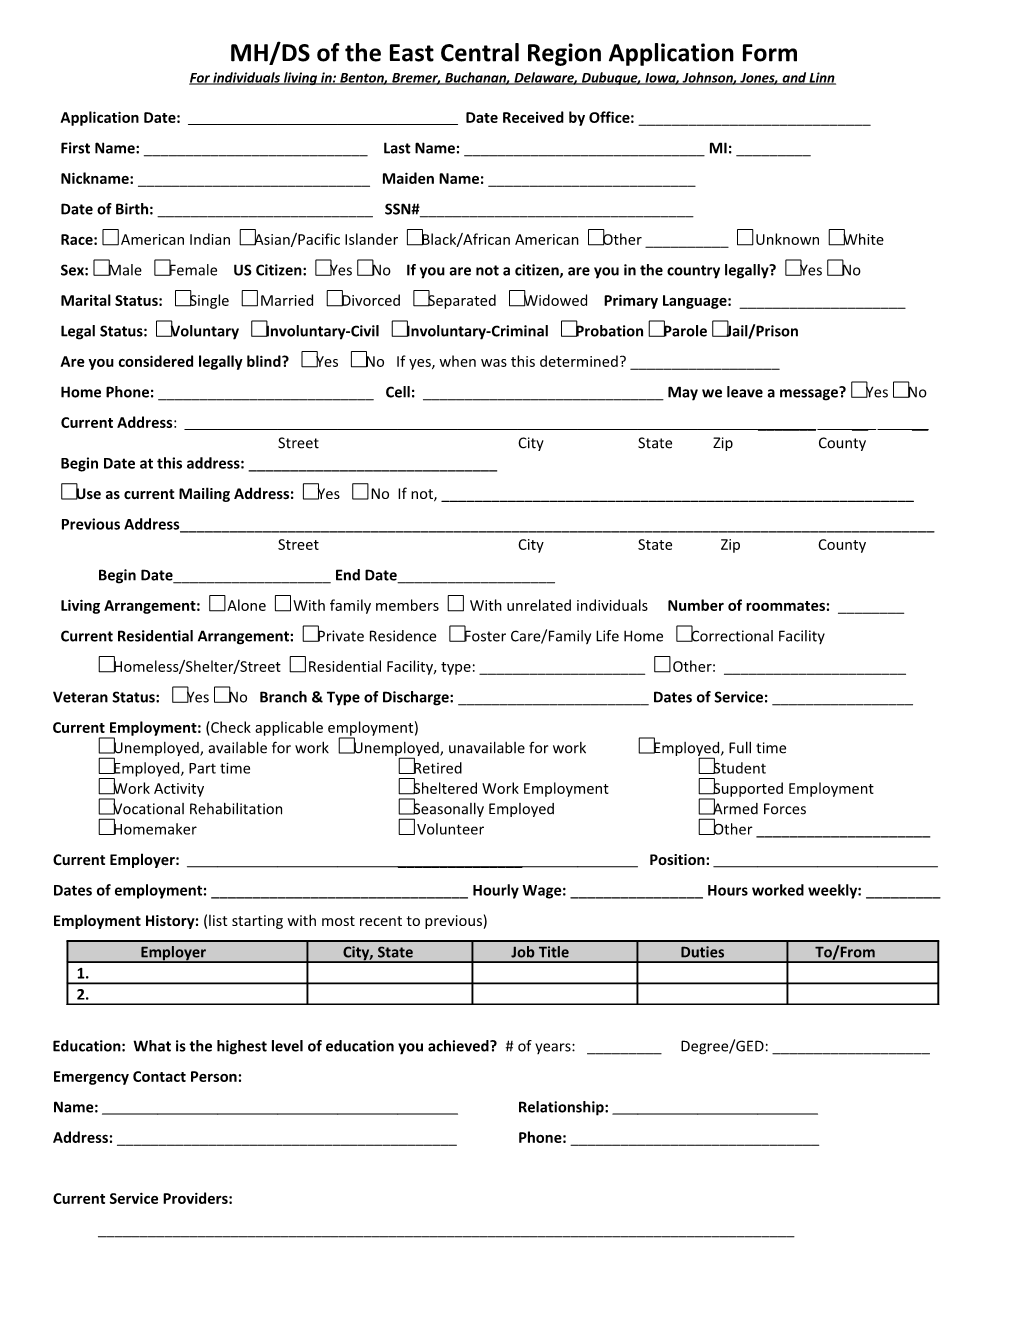 MH/DS of the East Central Region Application Form